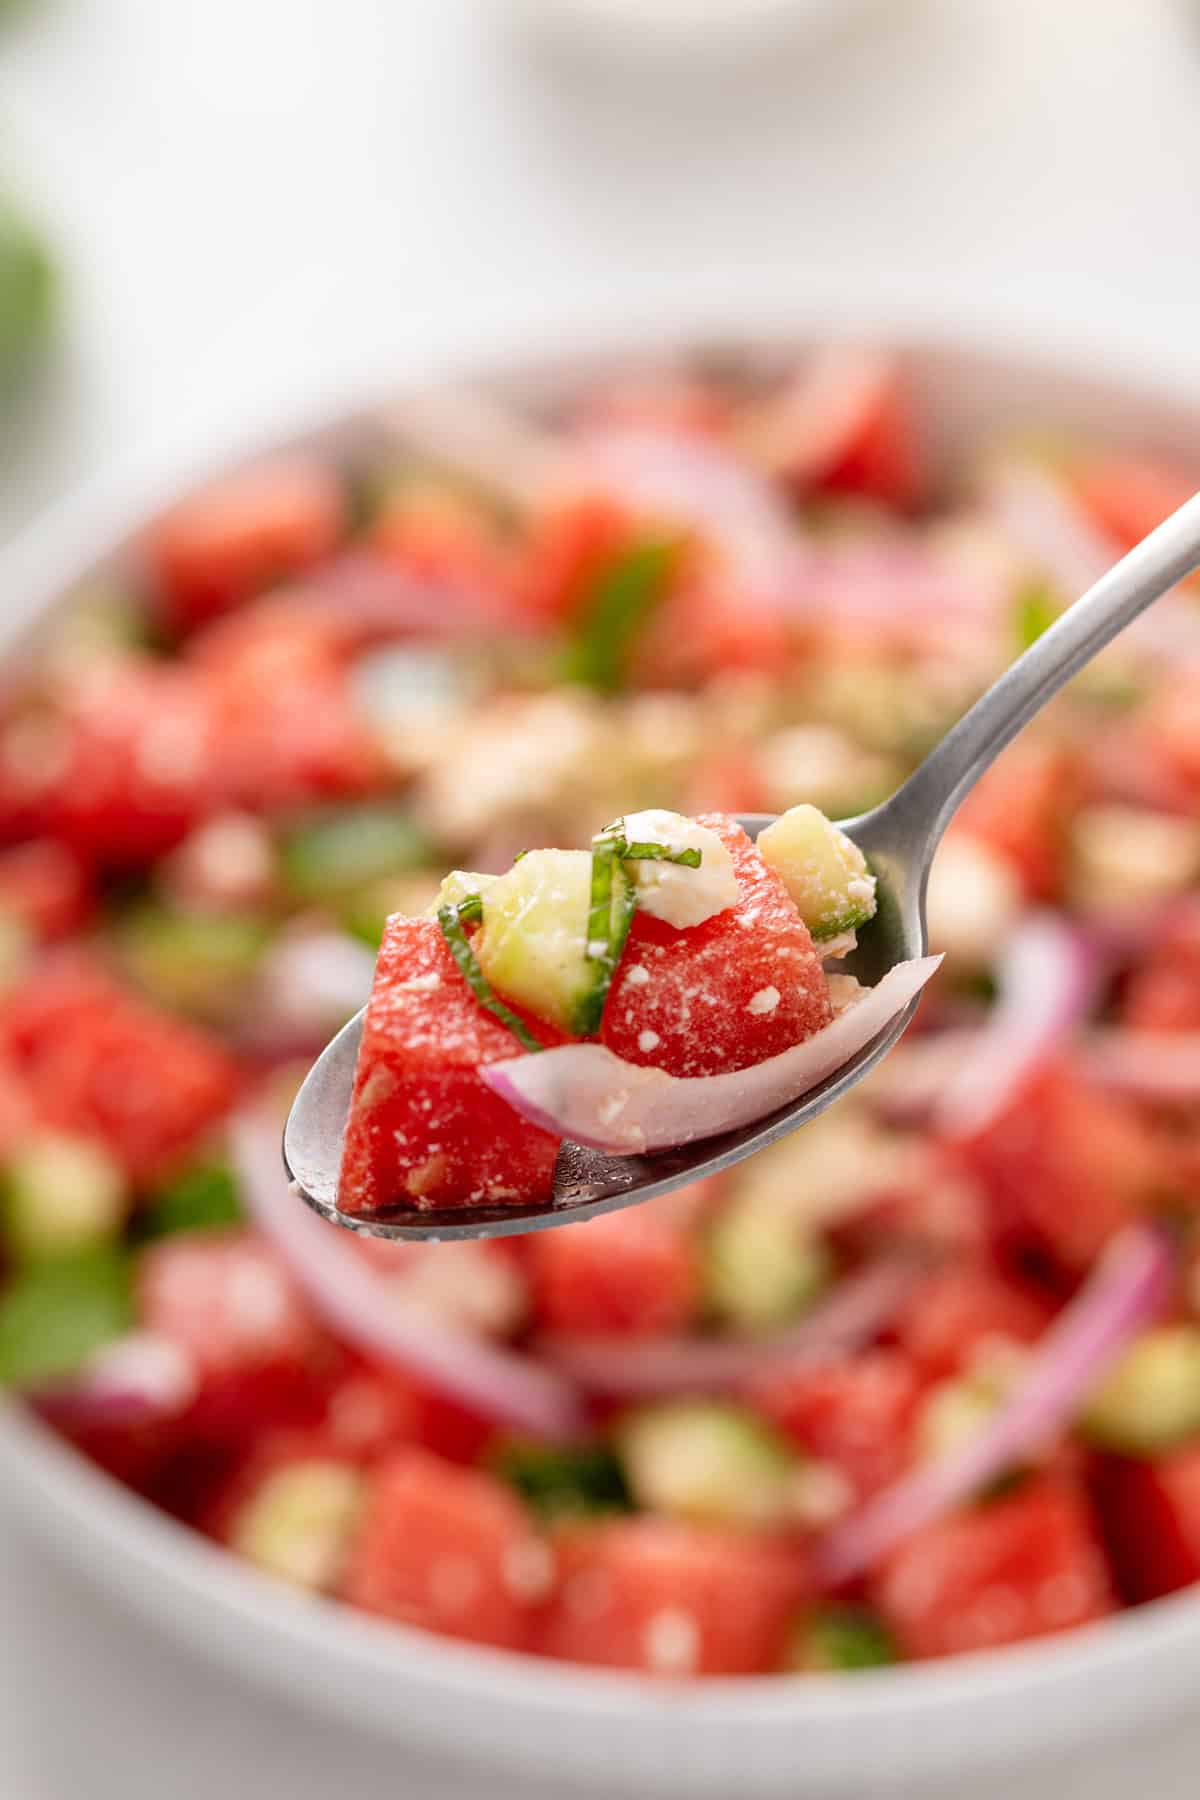 Spoon holding up a bite of watermelon feta salad.